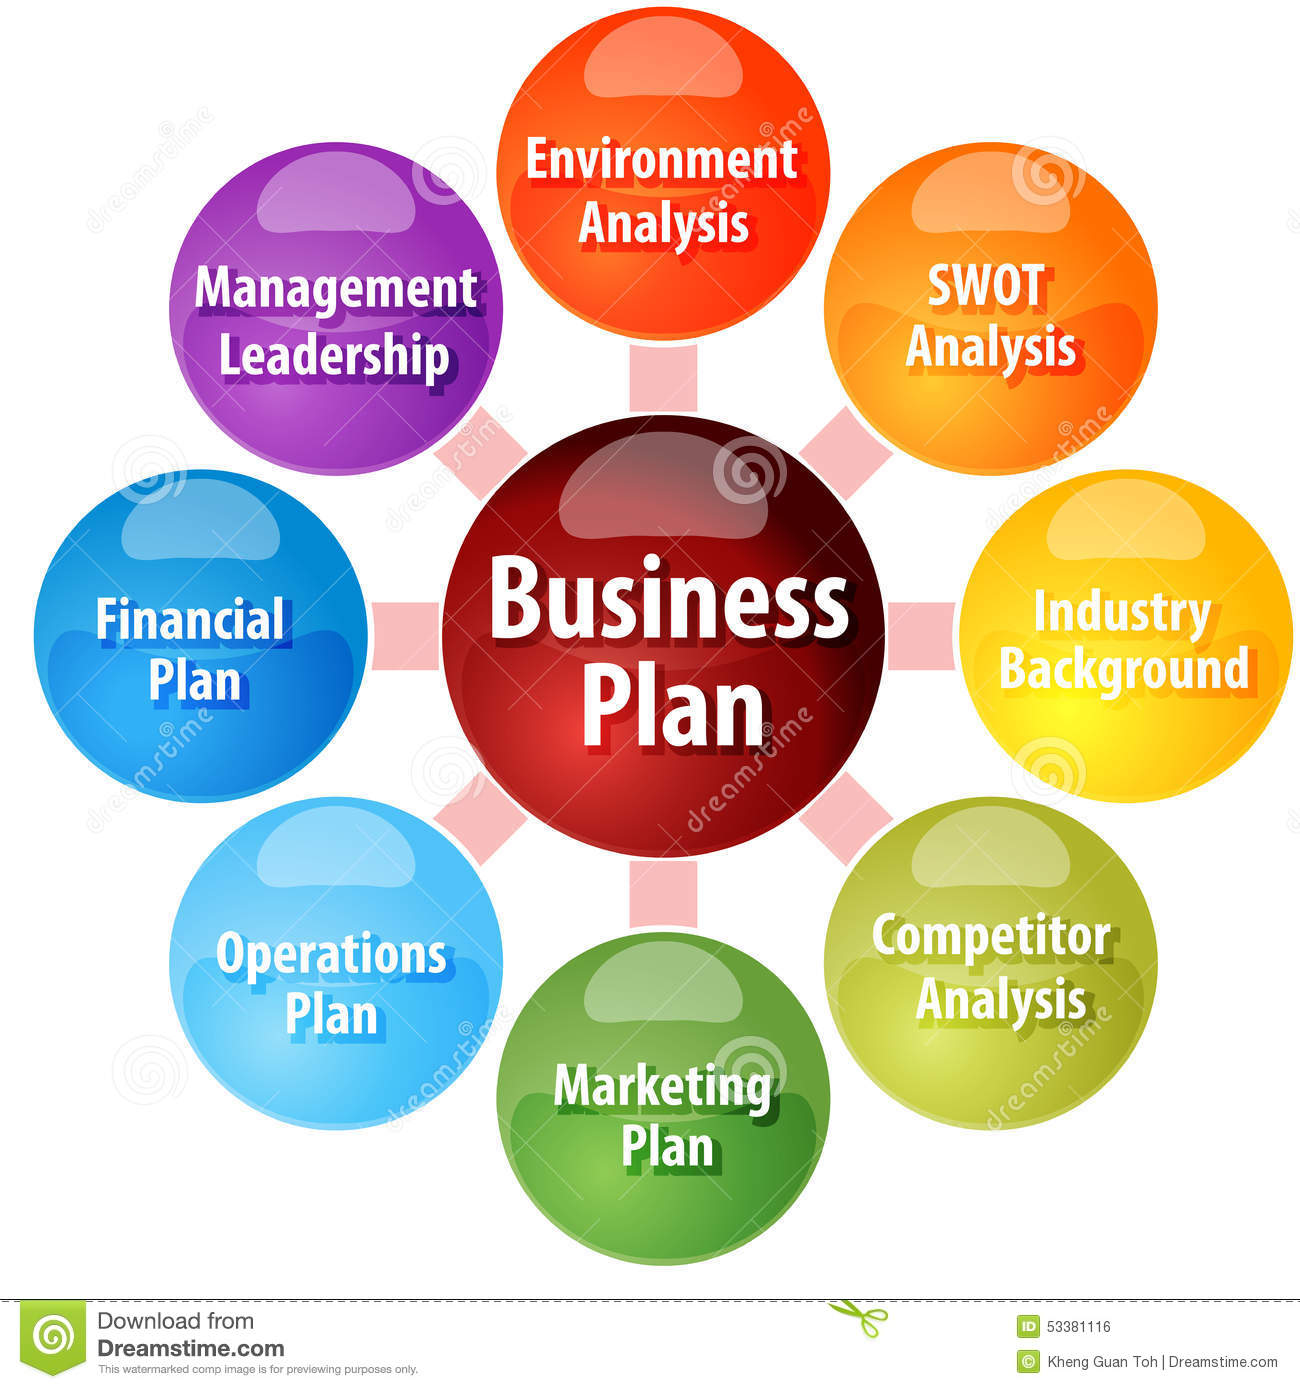 main elements of a business plan